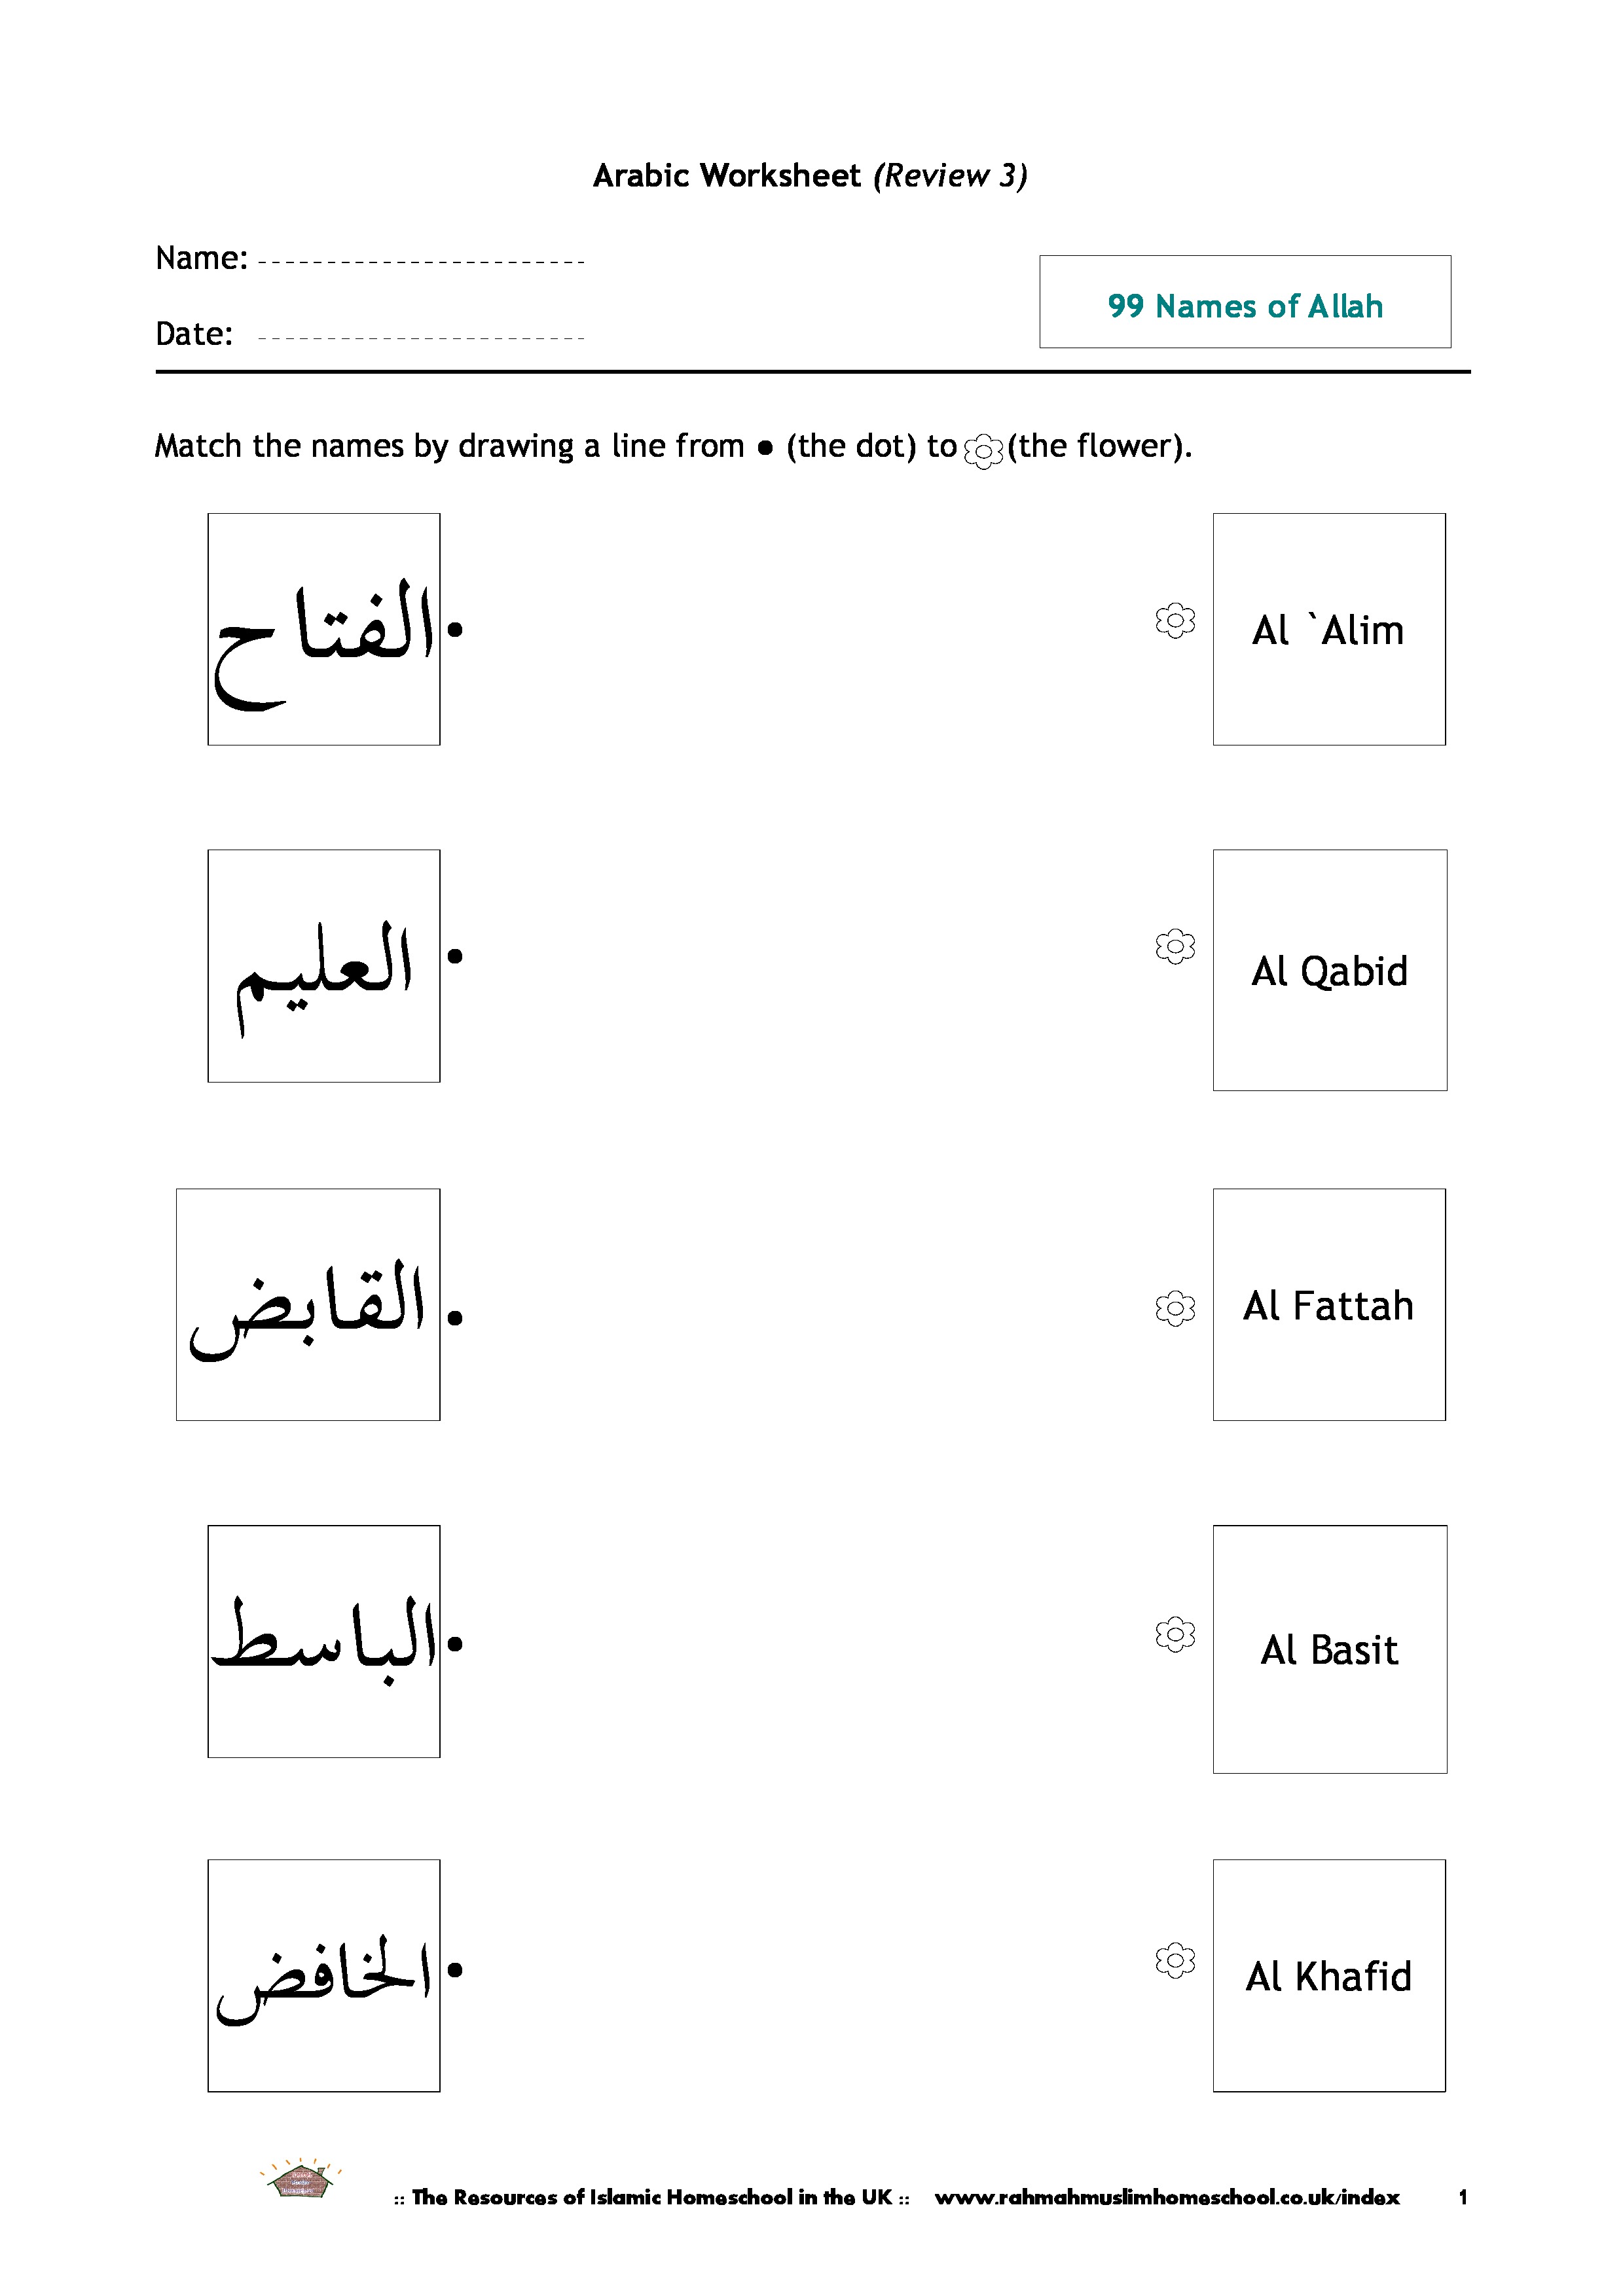 13-best-images-of-english-words-derived-from-arabic-worksheet-arabic-worksheet-basic-arabic